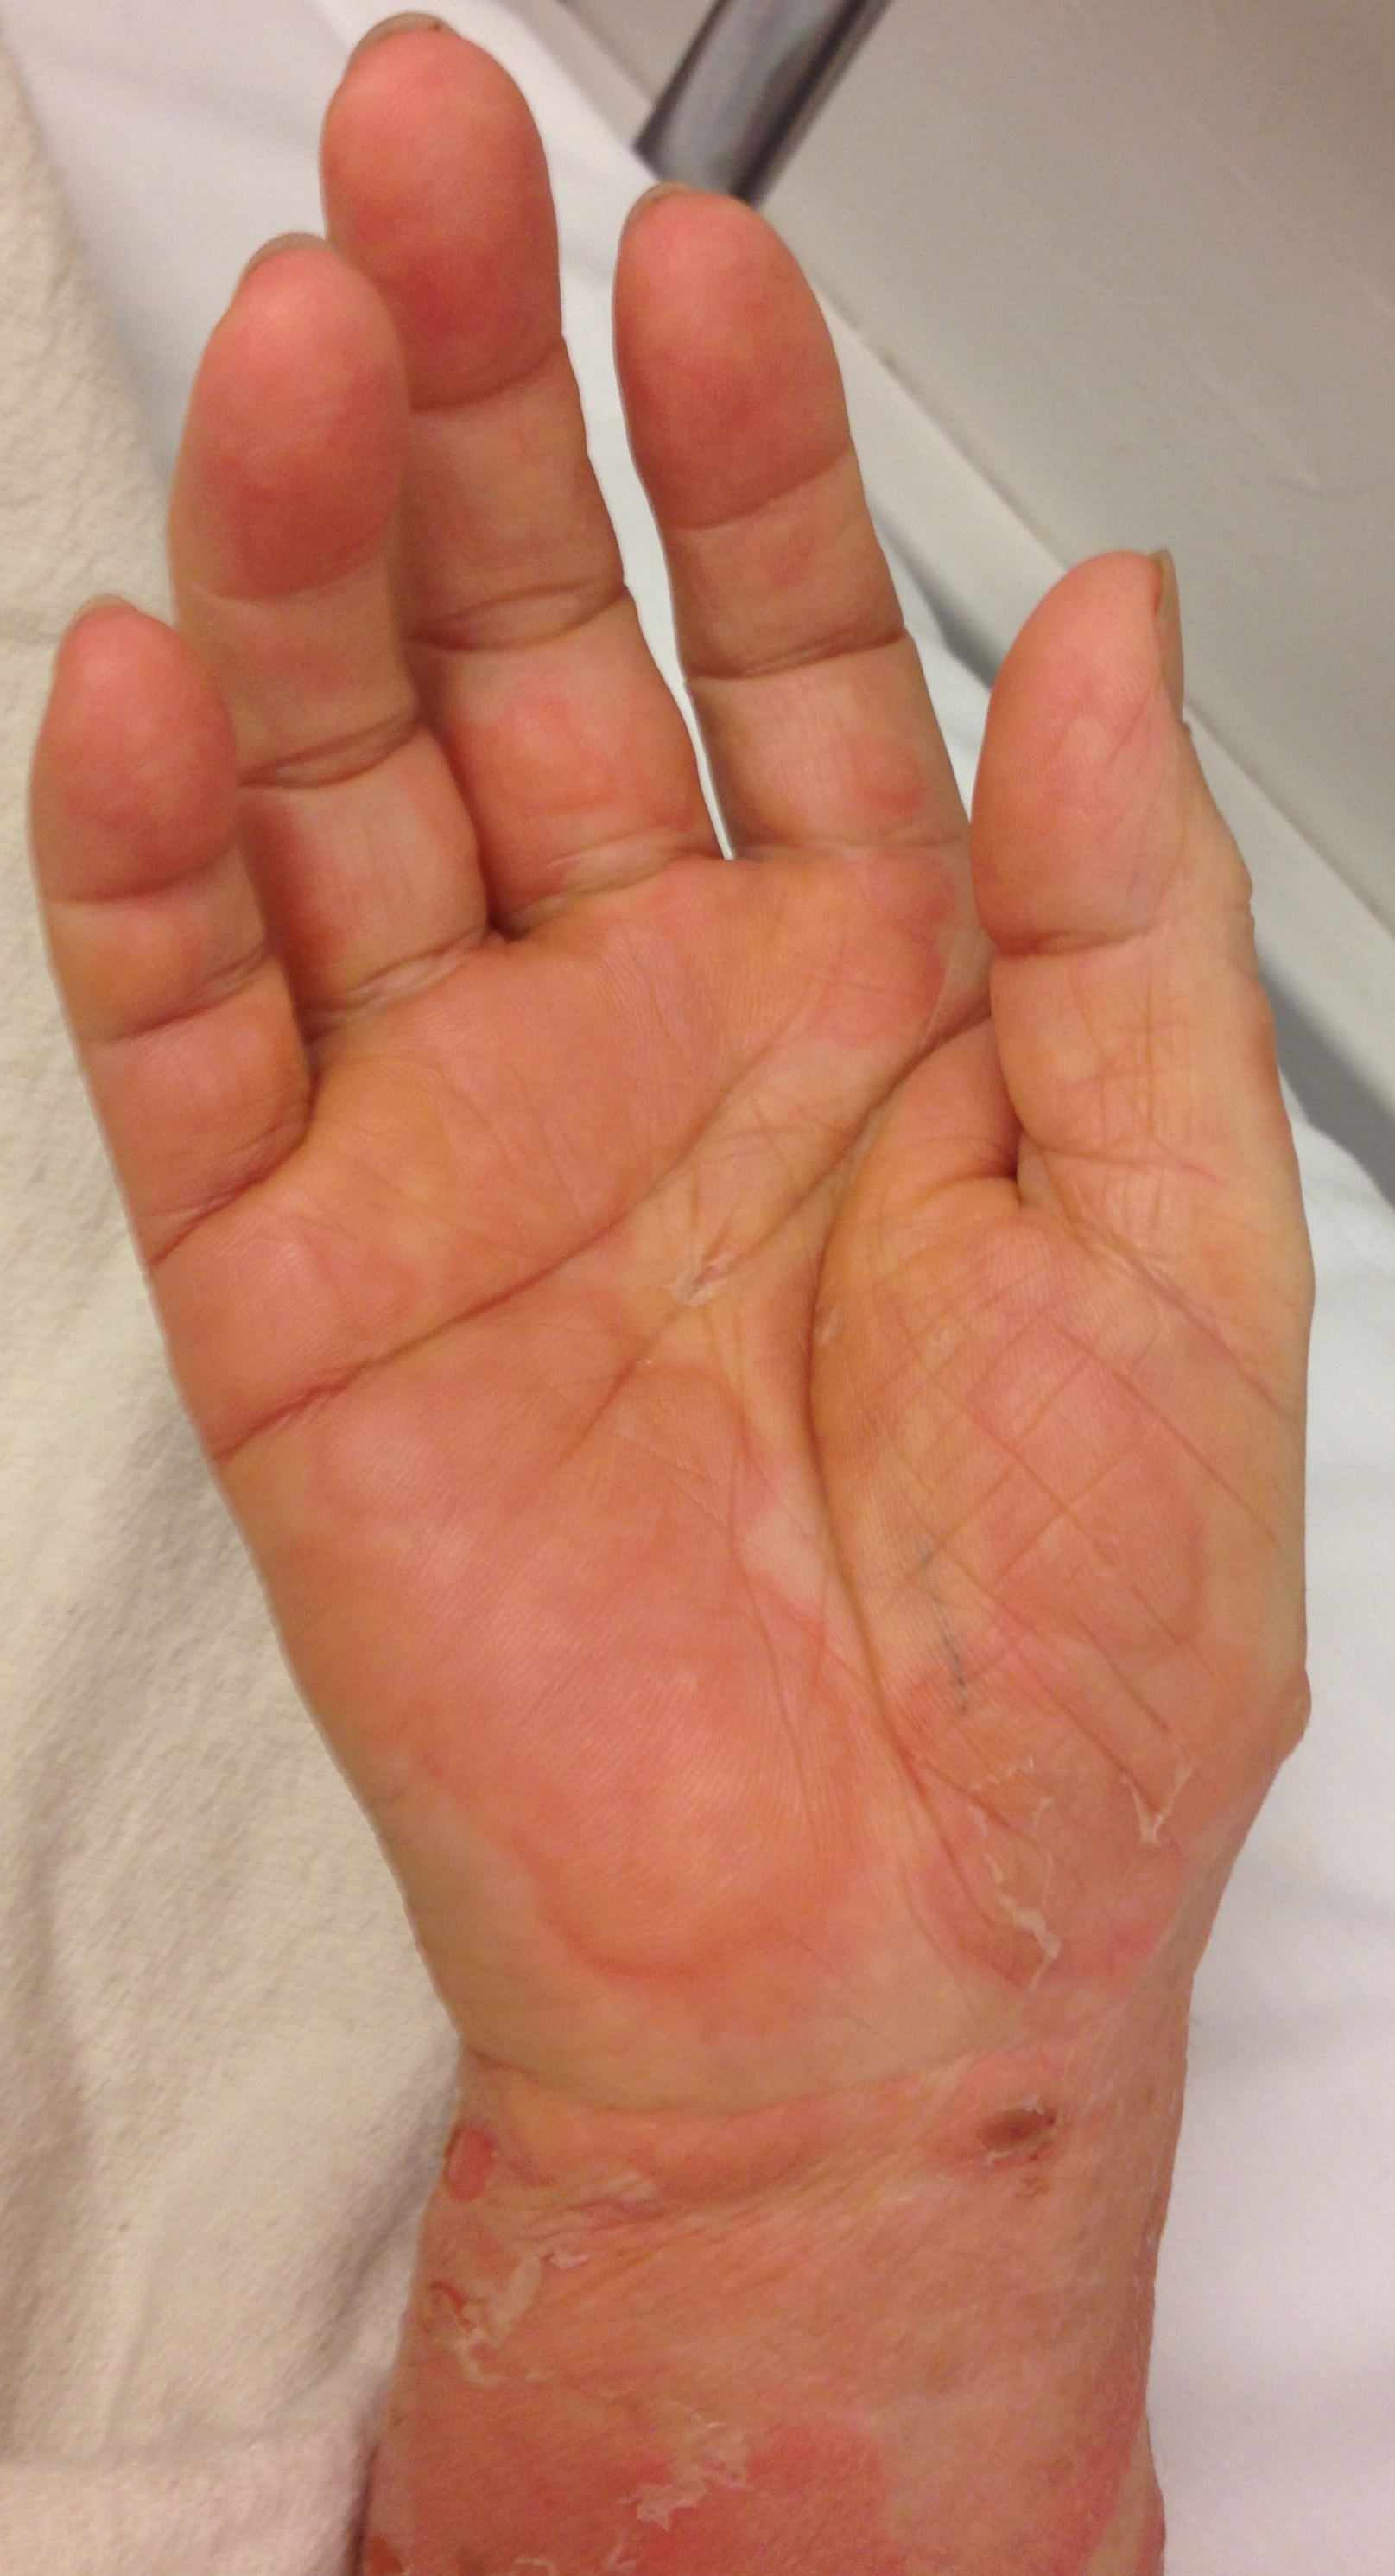 Tense Bullae and Urticaria in a Woman in Her Sixties